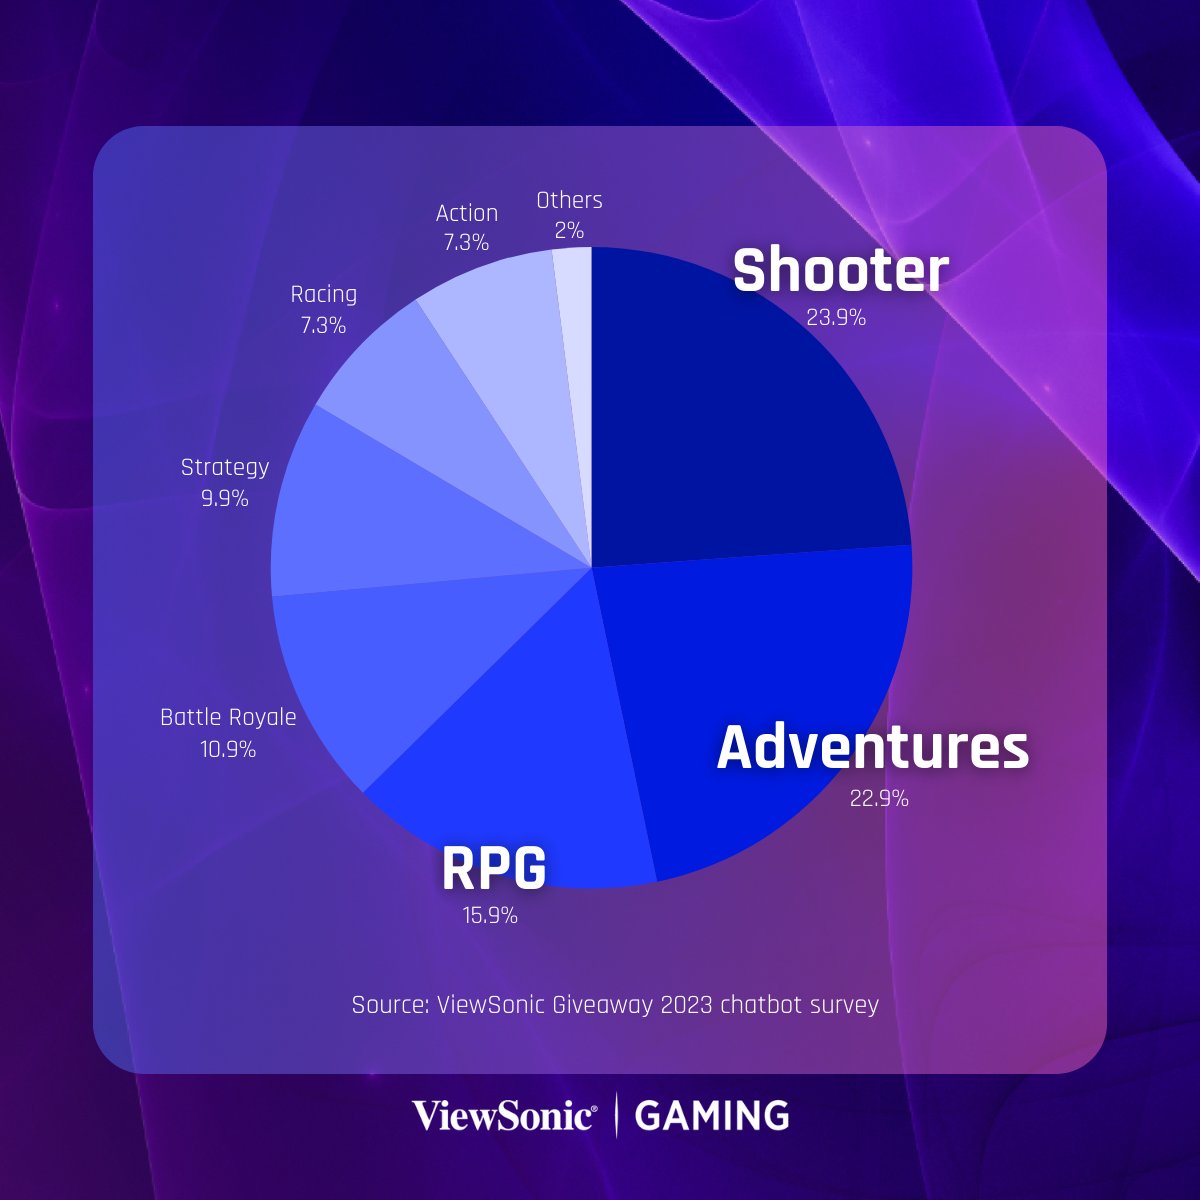 Epic quests or fast action? See which gaming genres top our survey. Did yours make the cut? Tell us your favorite in the comments! ✨ 📋 Insights based on 430 responses from our 2023 Giveaway Survey. #ViewSonic #ViewSonicGaming #GamingMonitor #Gamers